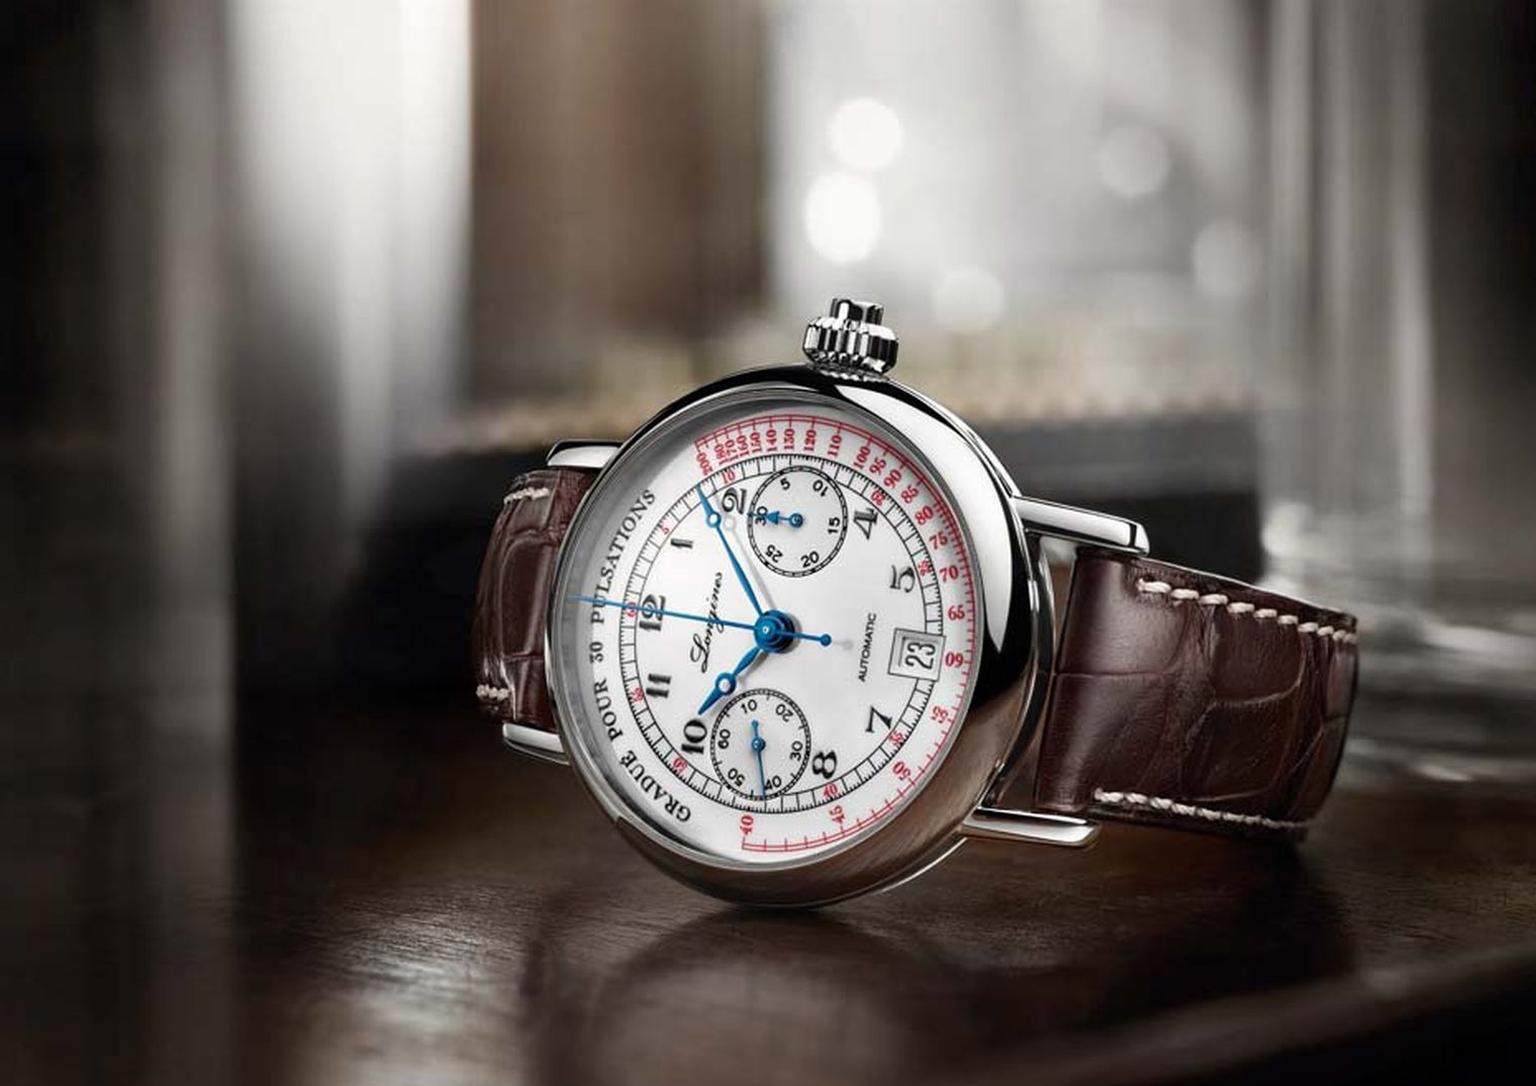 For purists of mechanical watches, take heart because there is a revival in the watch world of the faithful pulsometer or pulsograph, aka the doctor’s watch. Longines' new Pulsometer chronograph takes its design cues from a 1920s model.